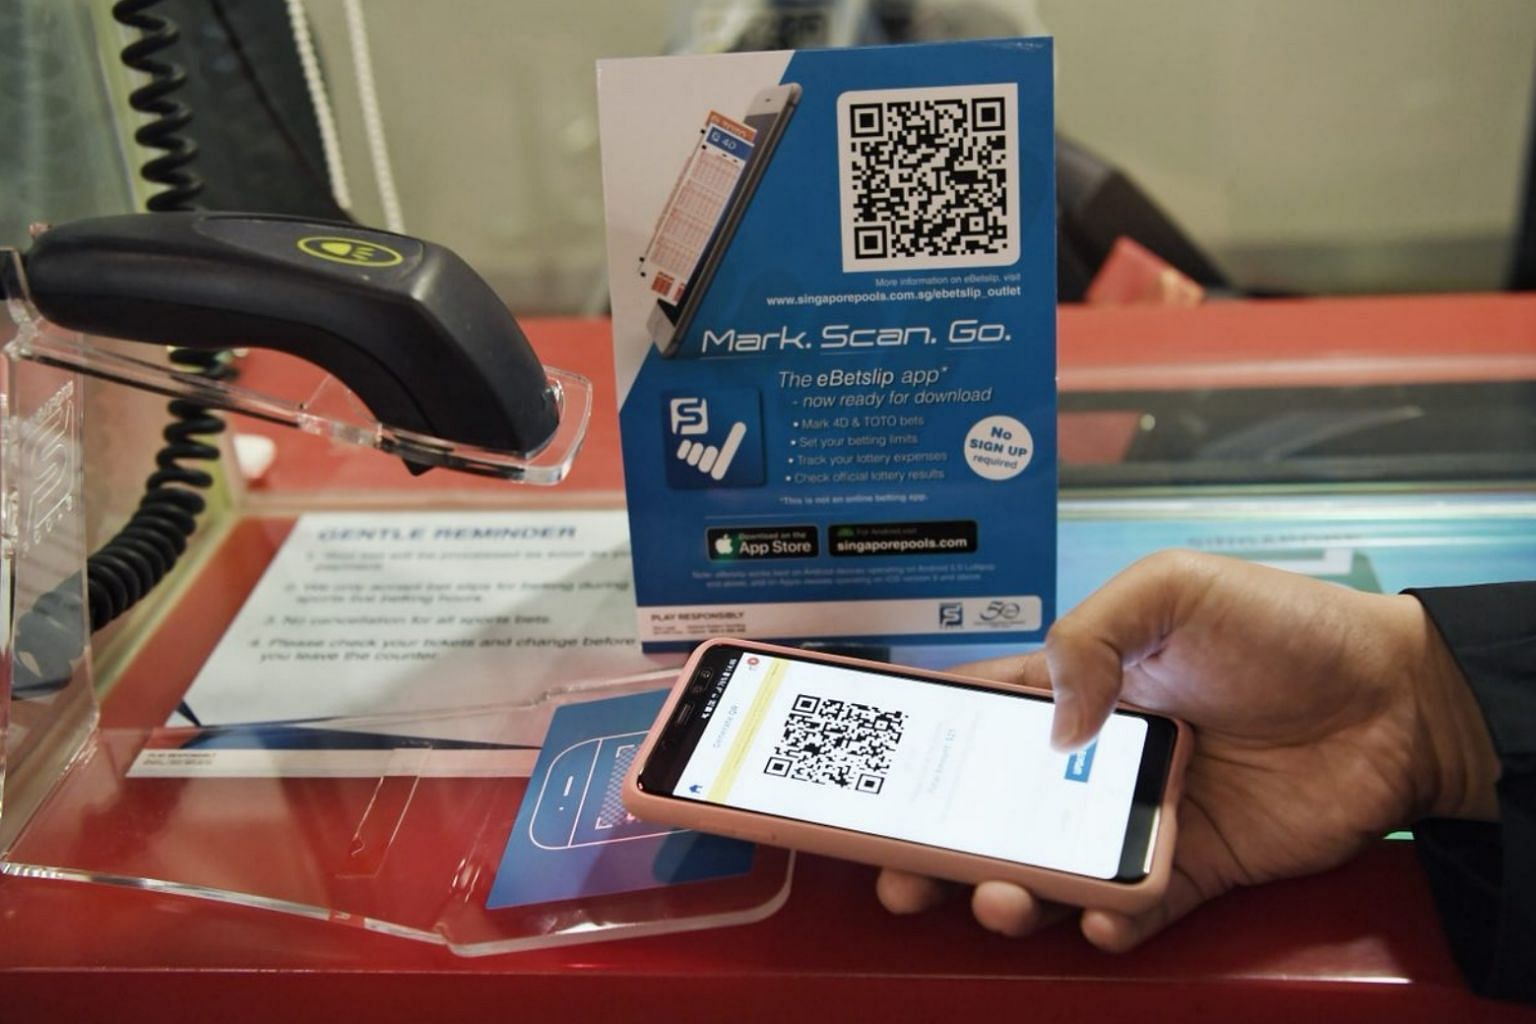 Singapore pools top up card where to buy